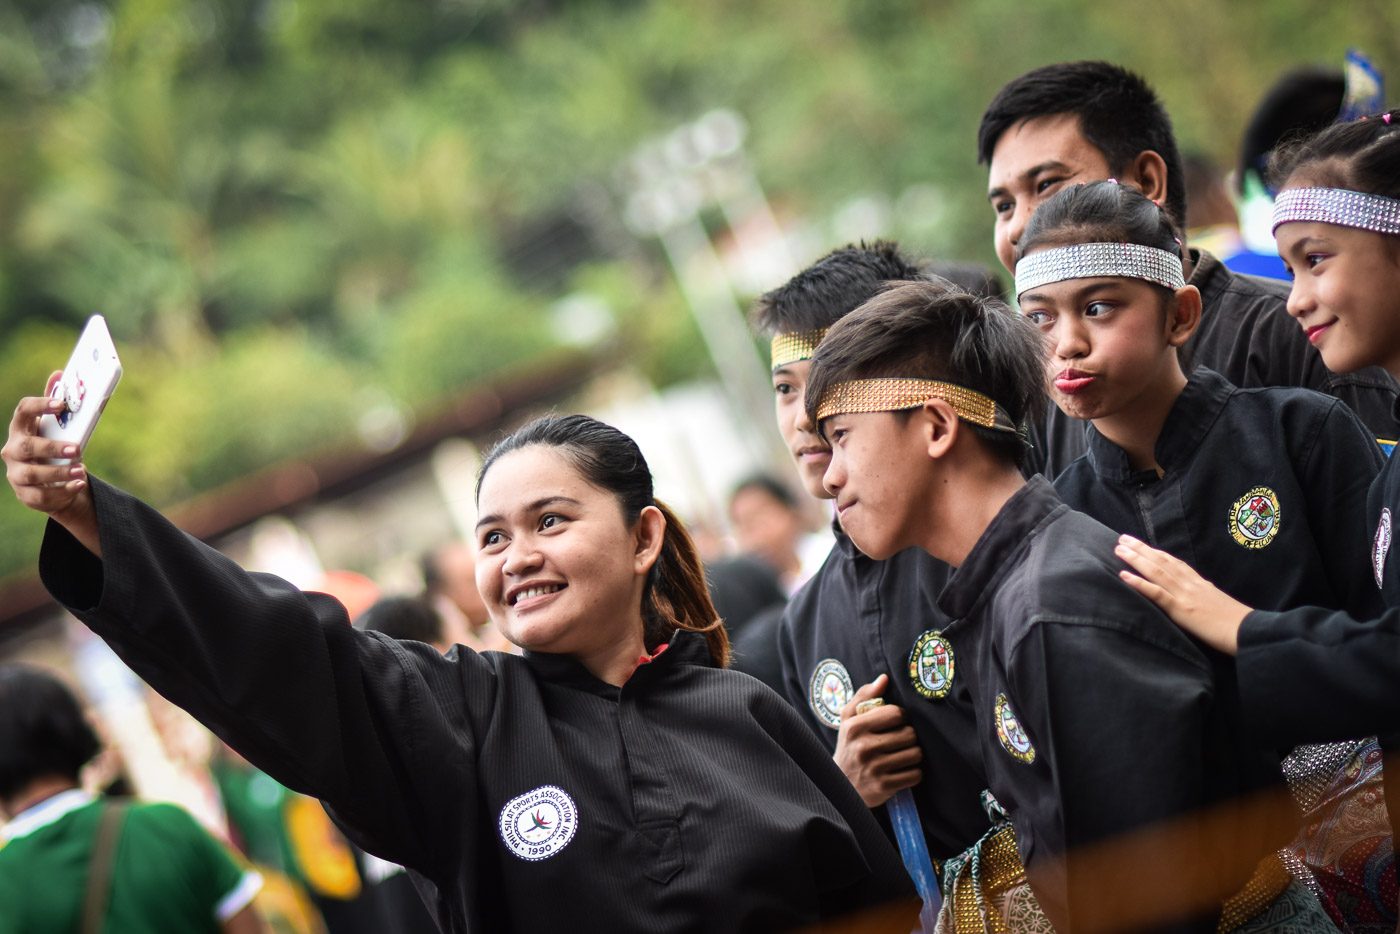 SMILE. Pencak Silat student-athletes from Zamboanga takes a selfie prior to the start of competitions. Photo by LeAnne Jazul/Rappler 